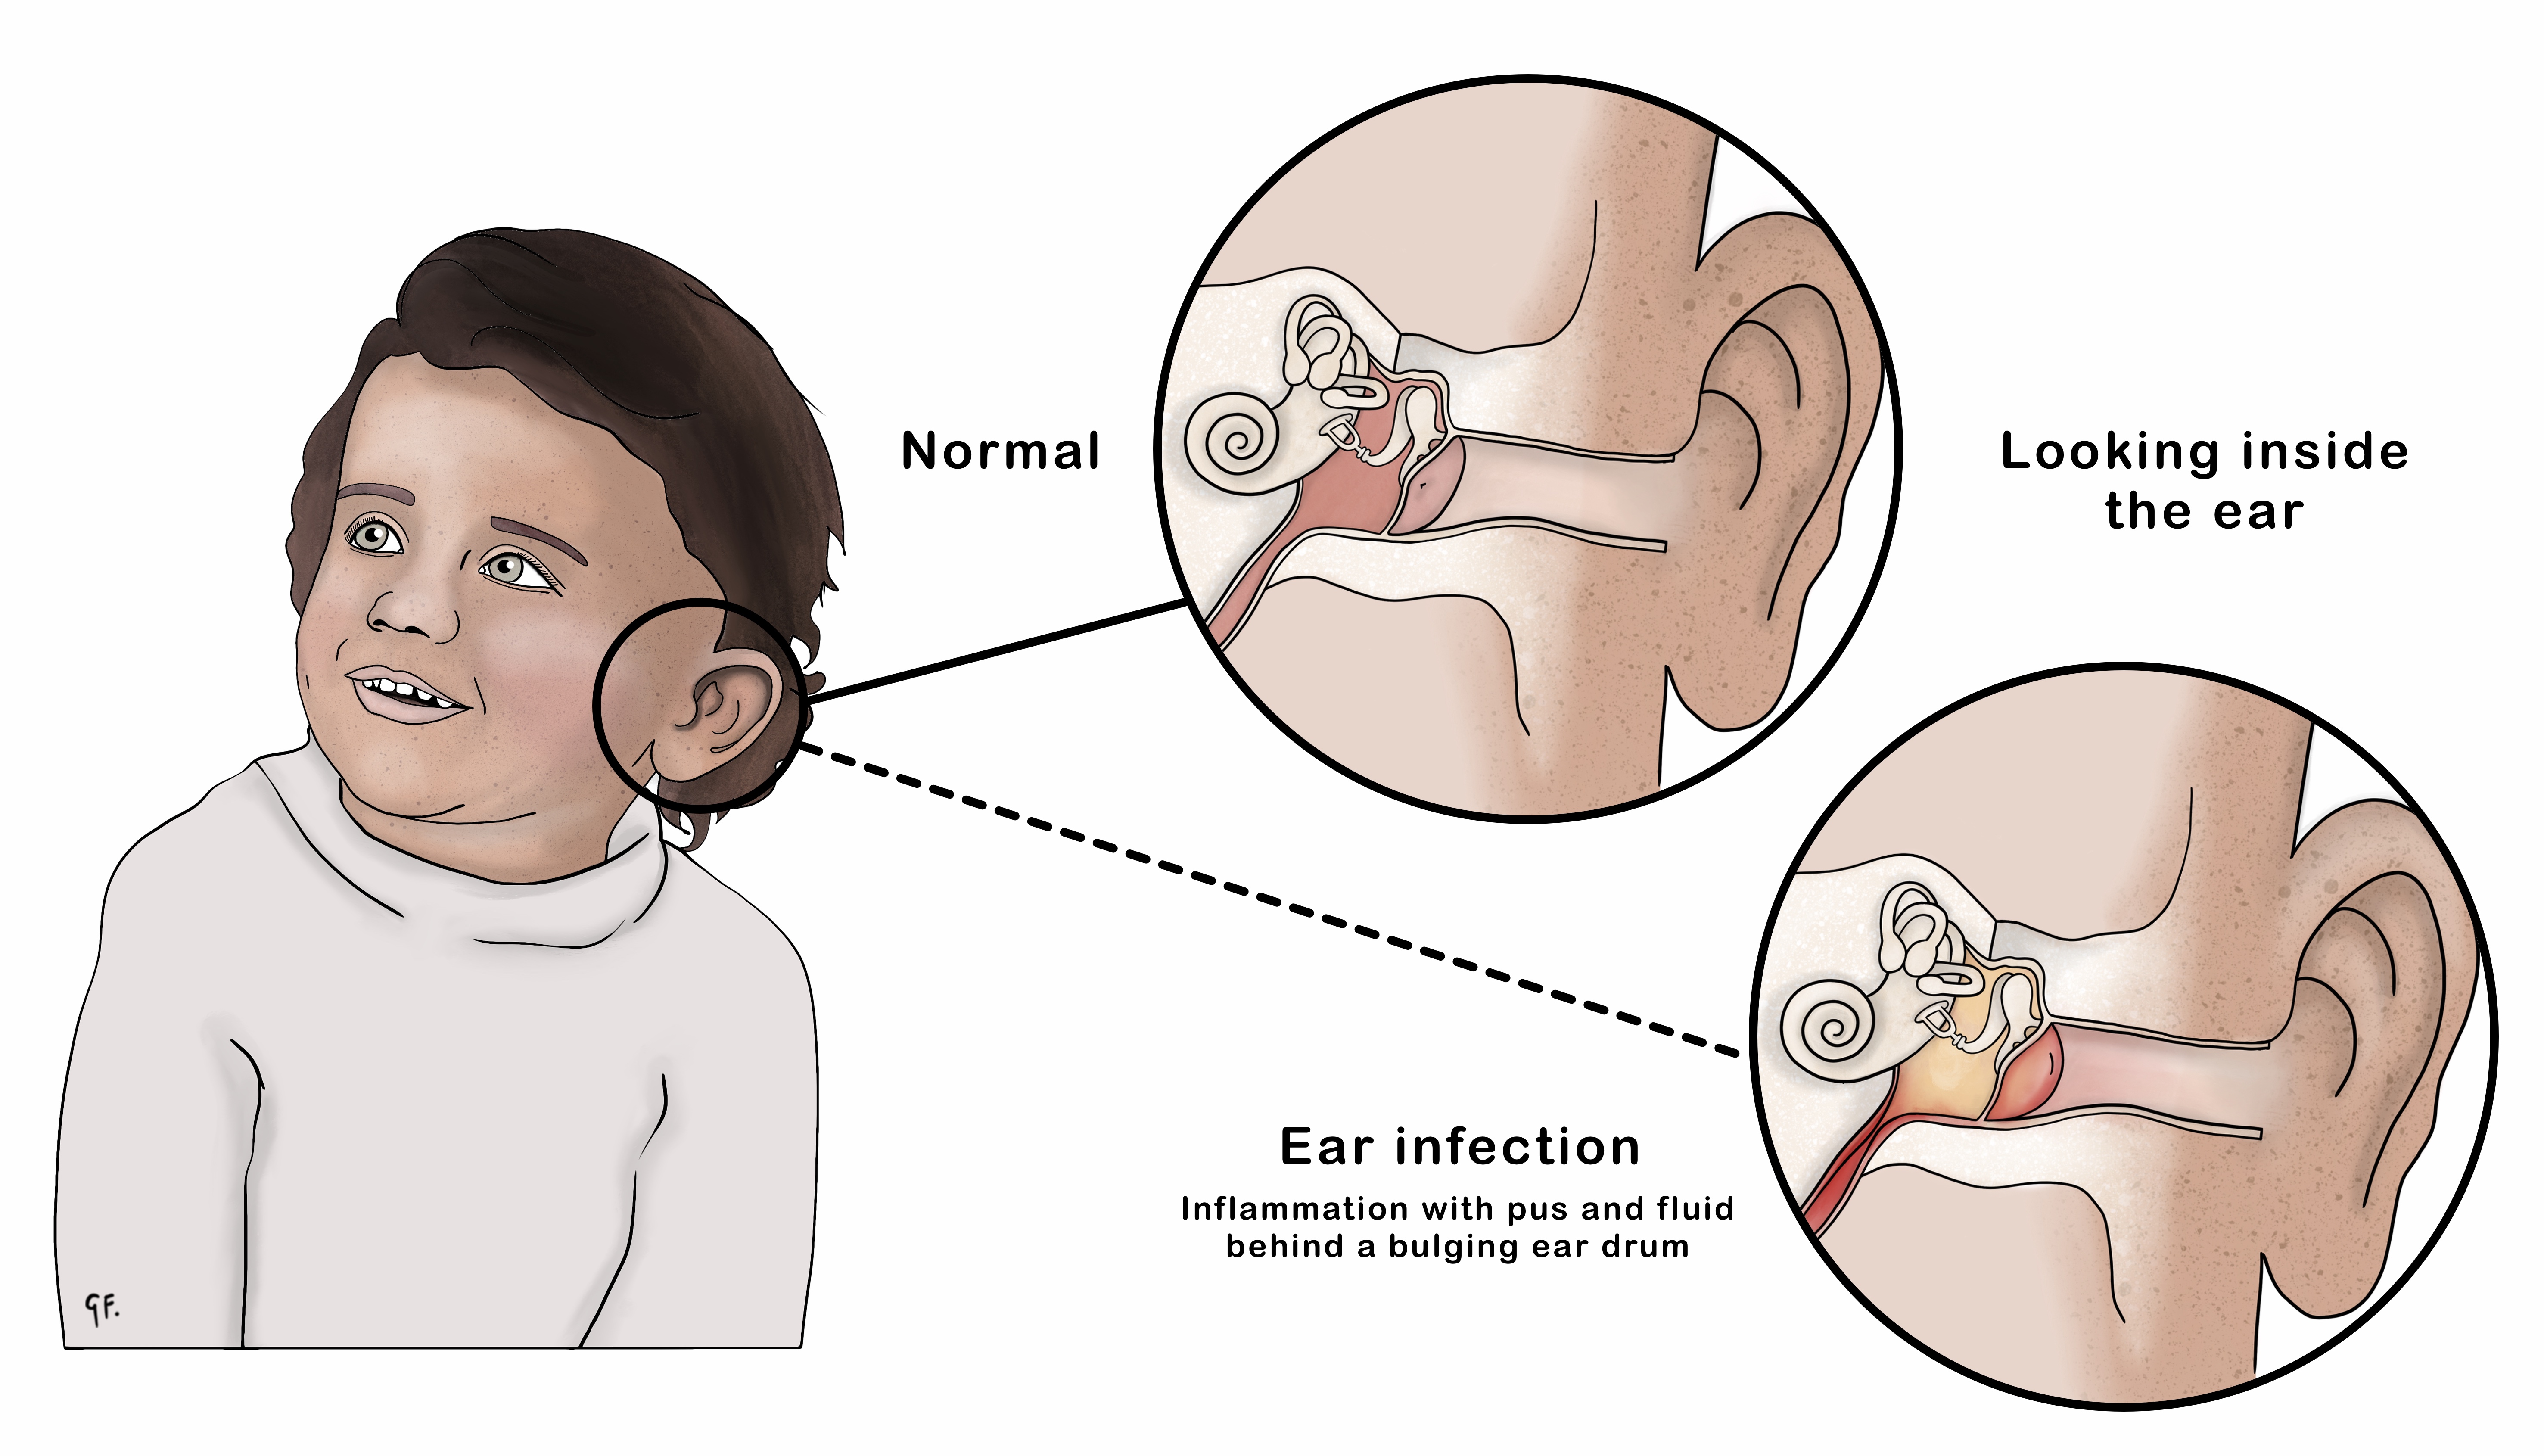 How to Prevent Winter Ear Infections